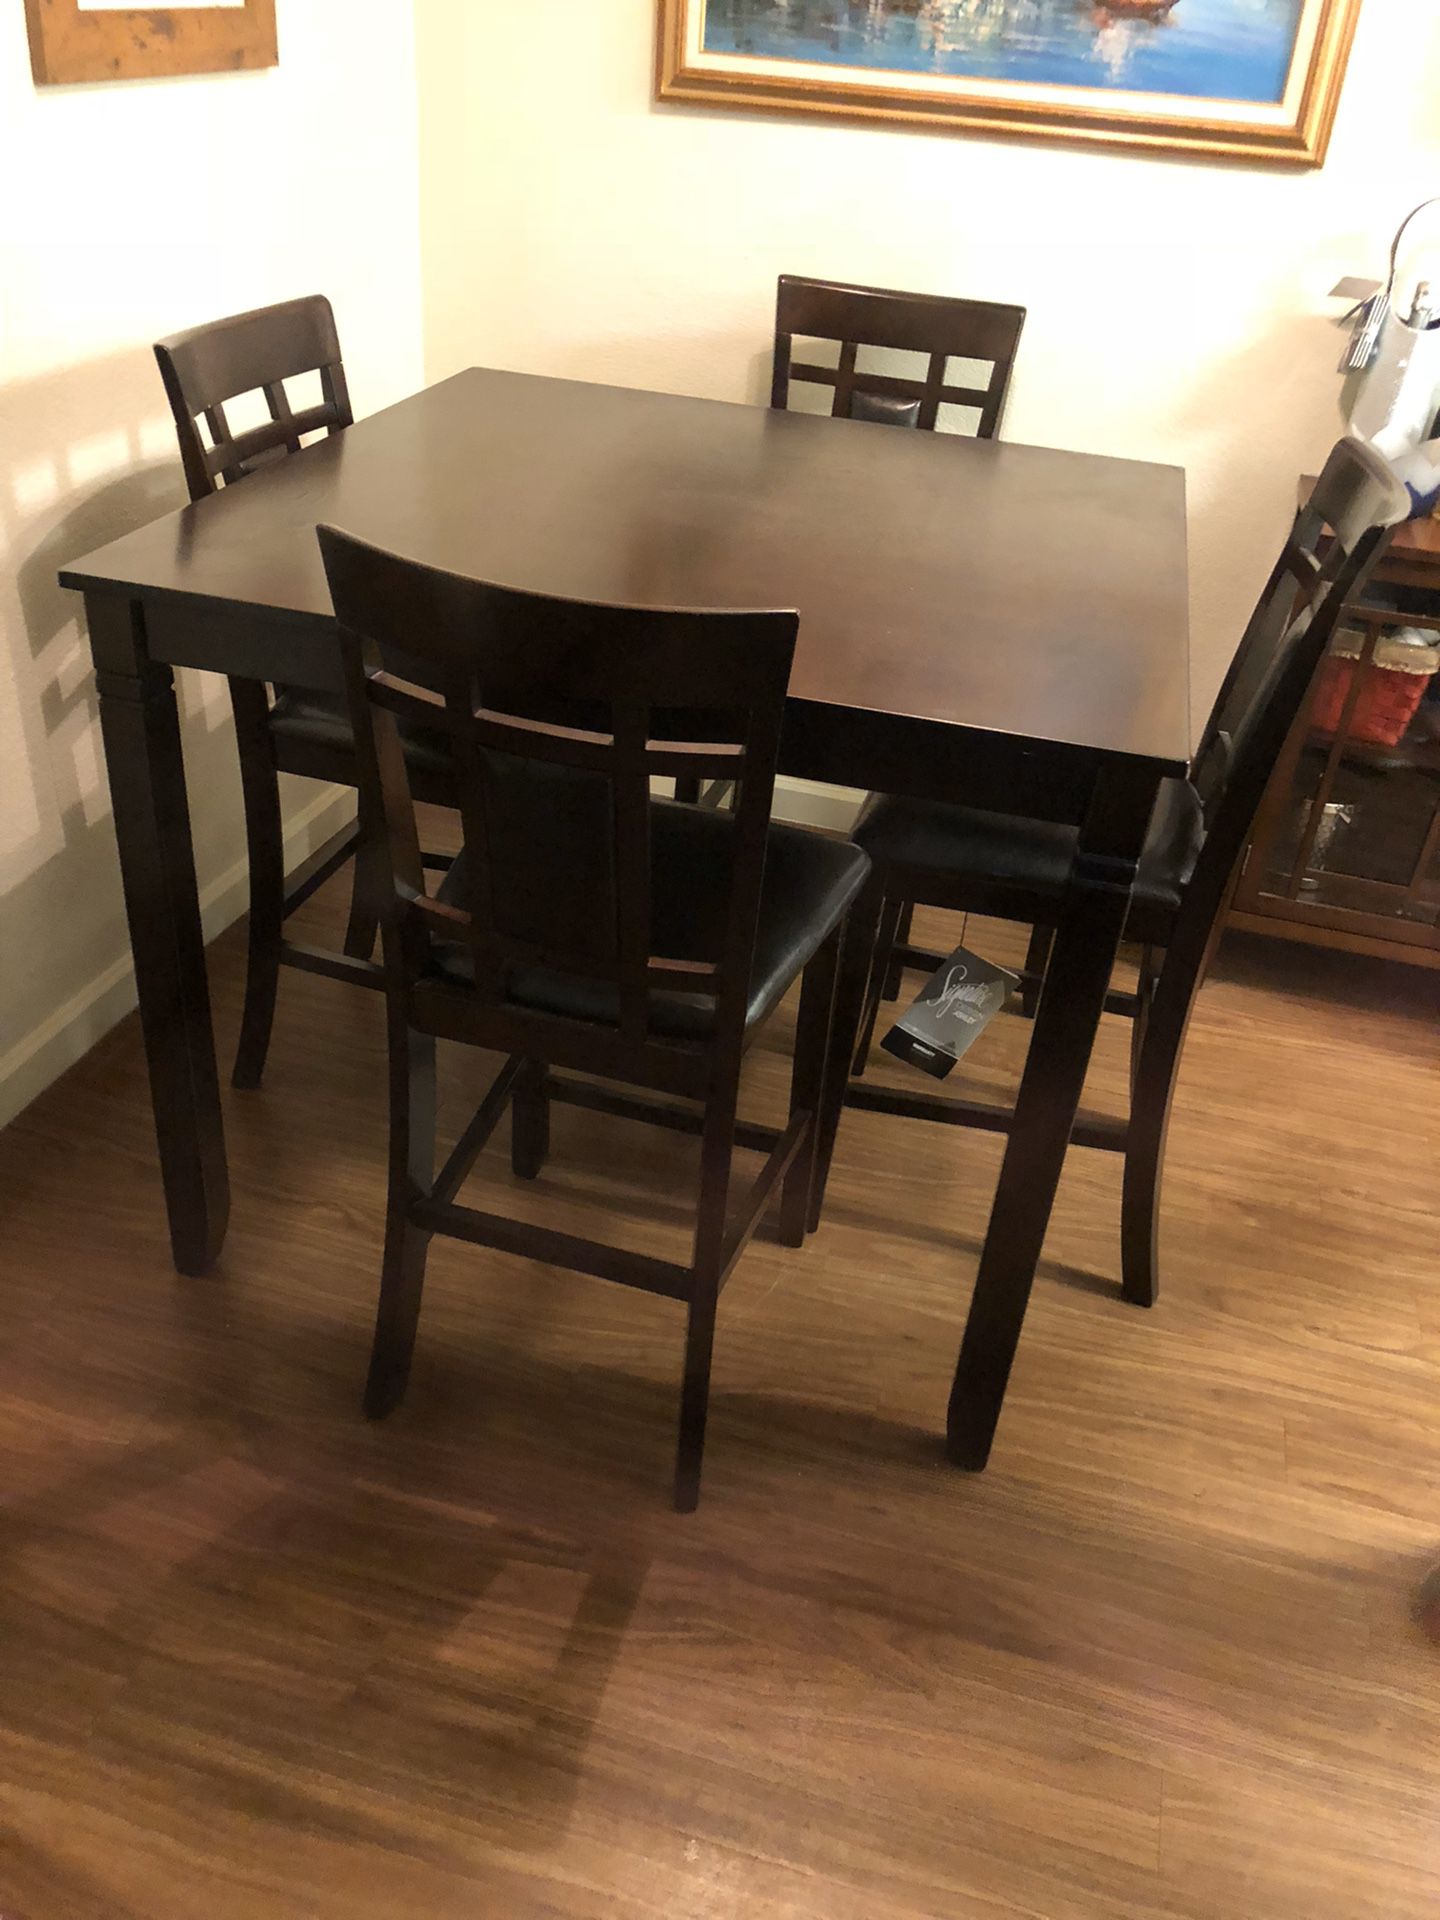 Wood kitchen table for sale.